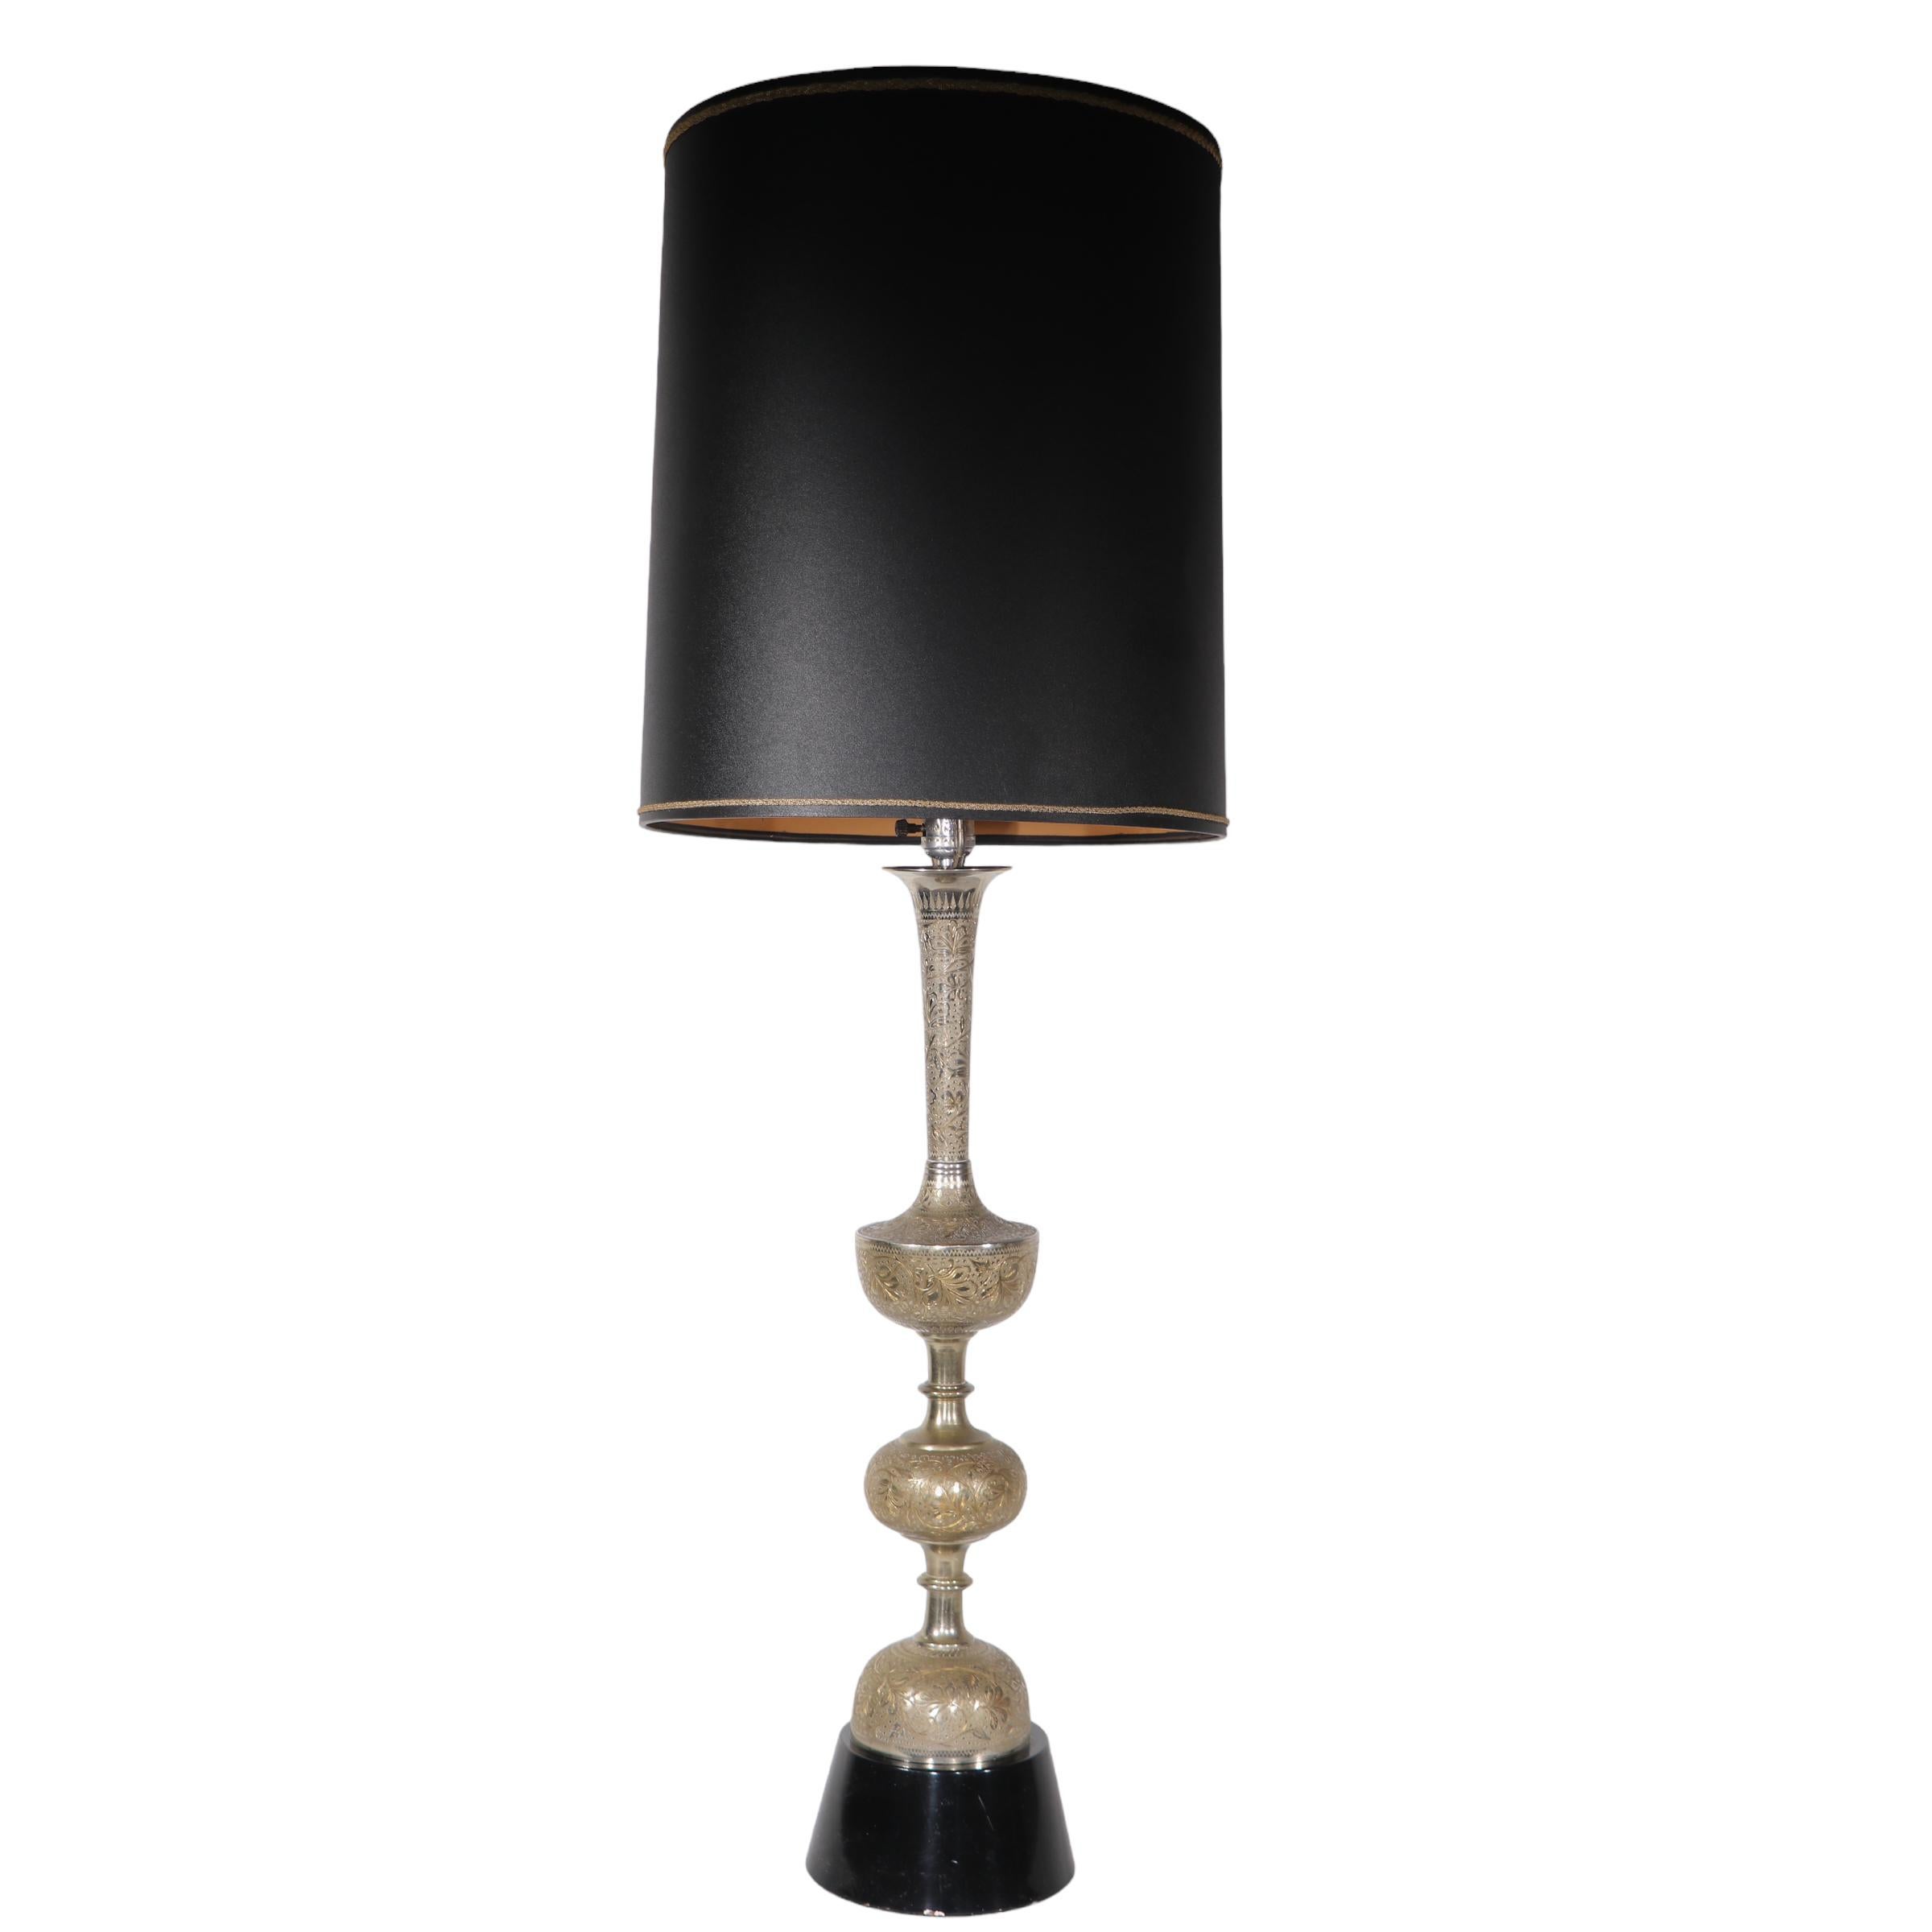  Large Vintage Table Lamp with Chased Silver Finish c. 1970's  For Sale